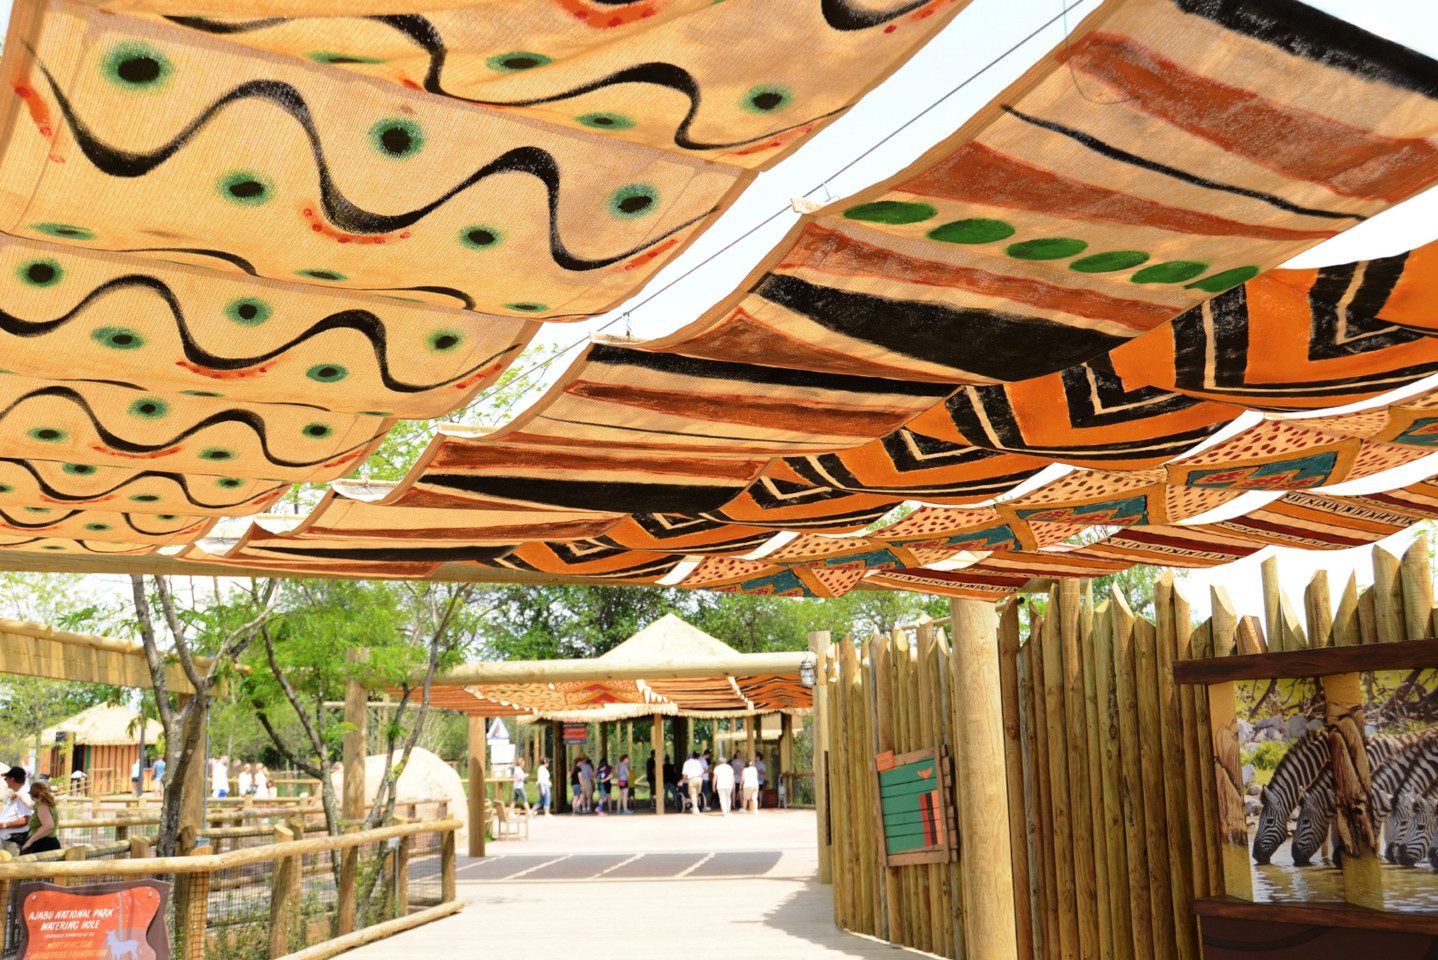 A wooden structure with many different colored fabric.